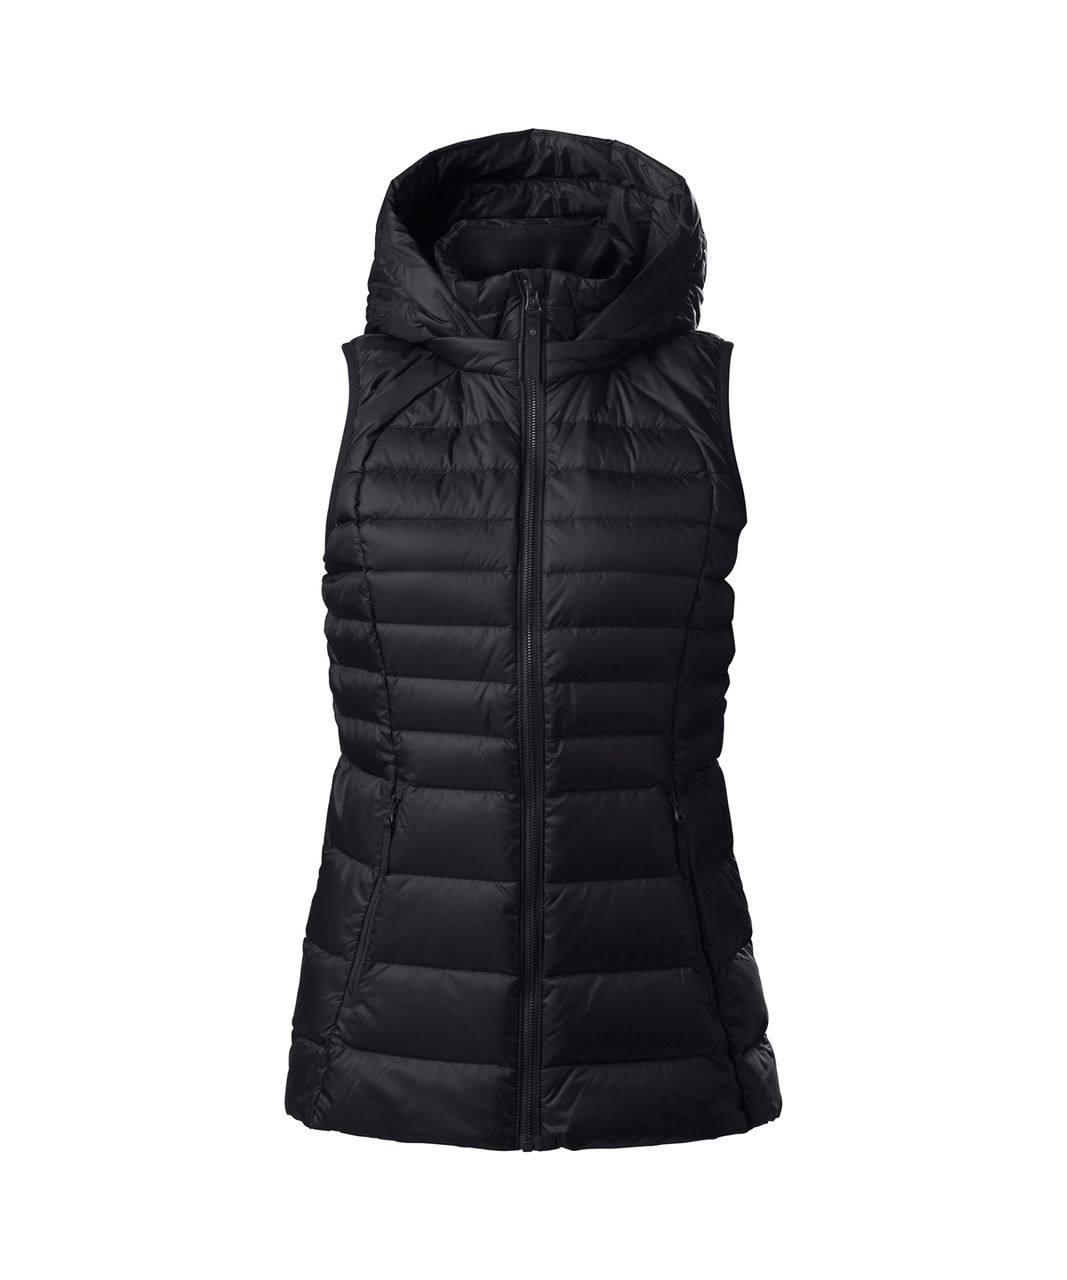 Lululemon Down for It All Vest in Black Size 0 -  Canada